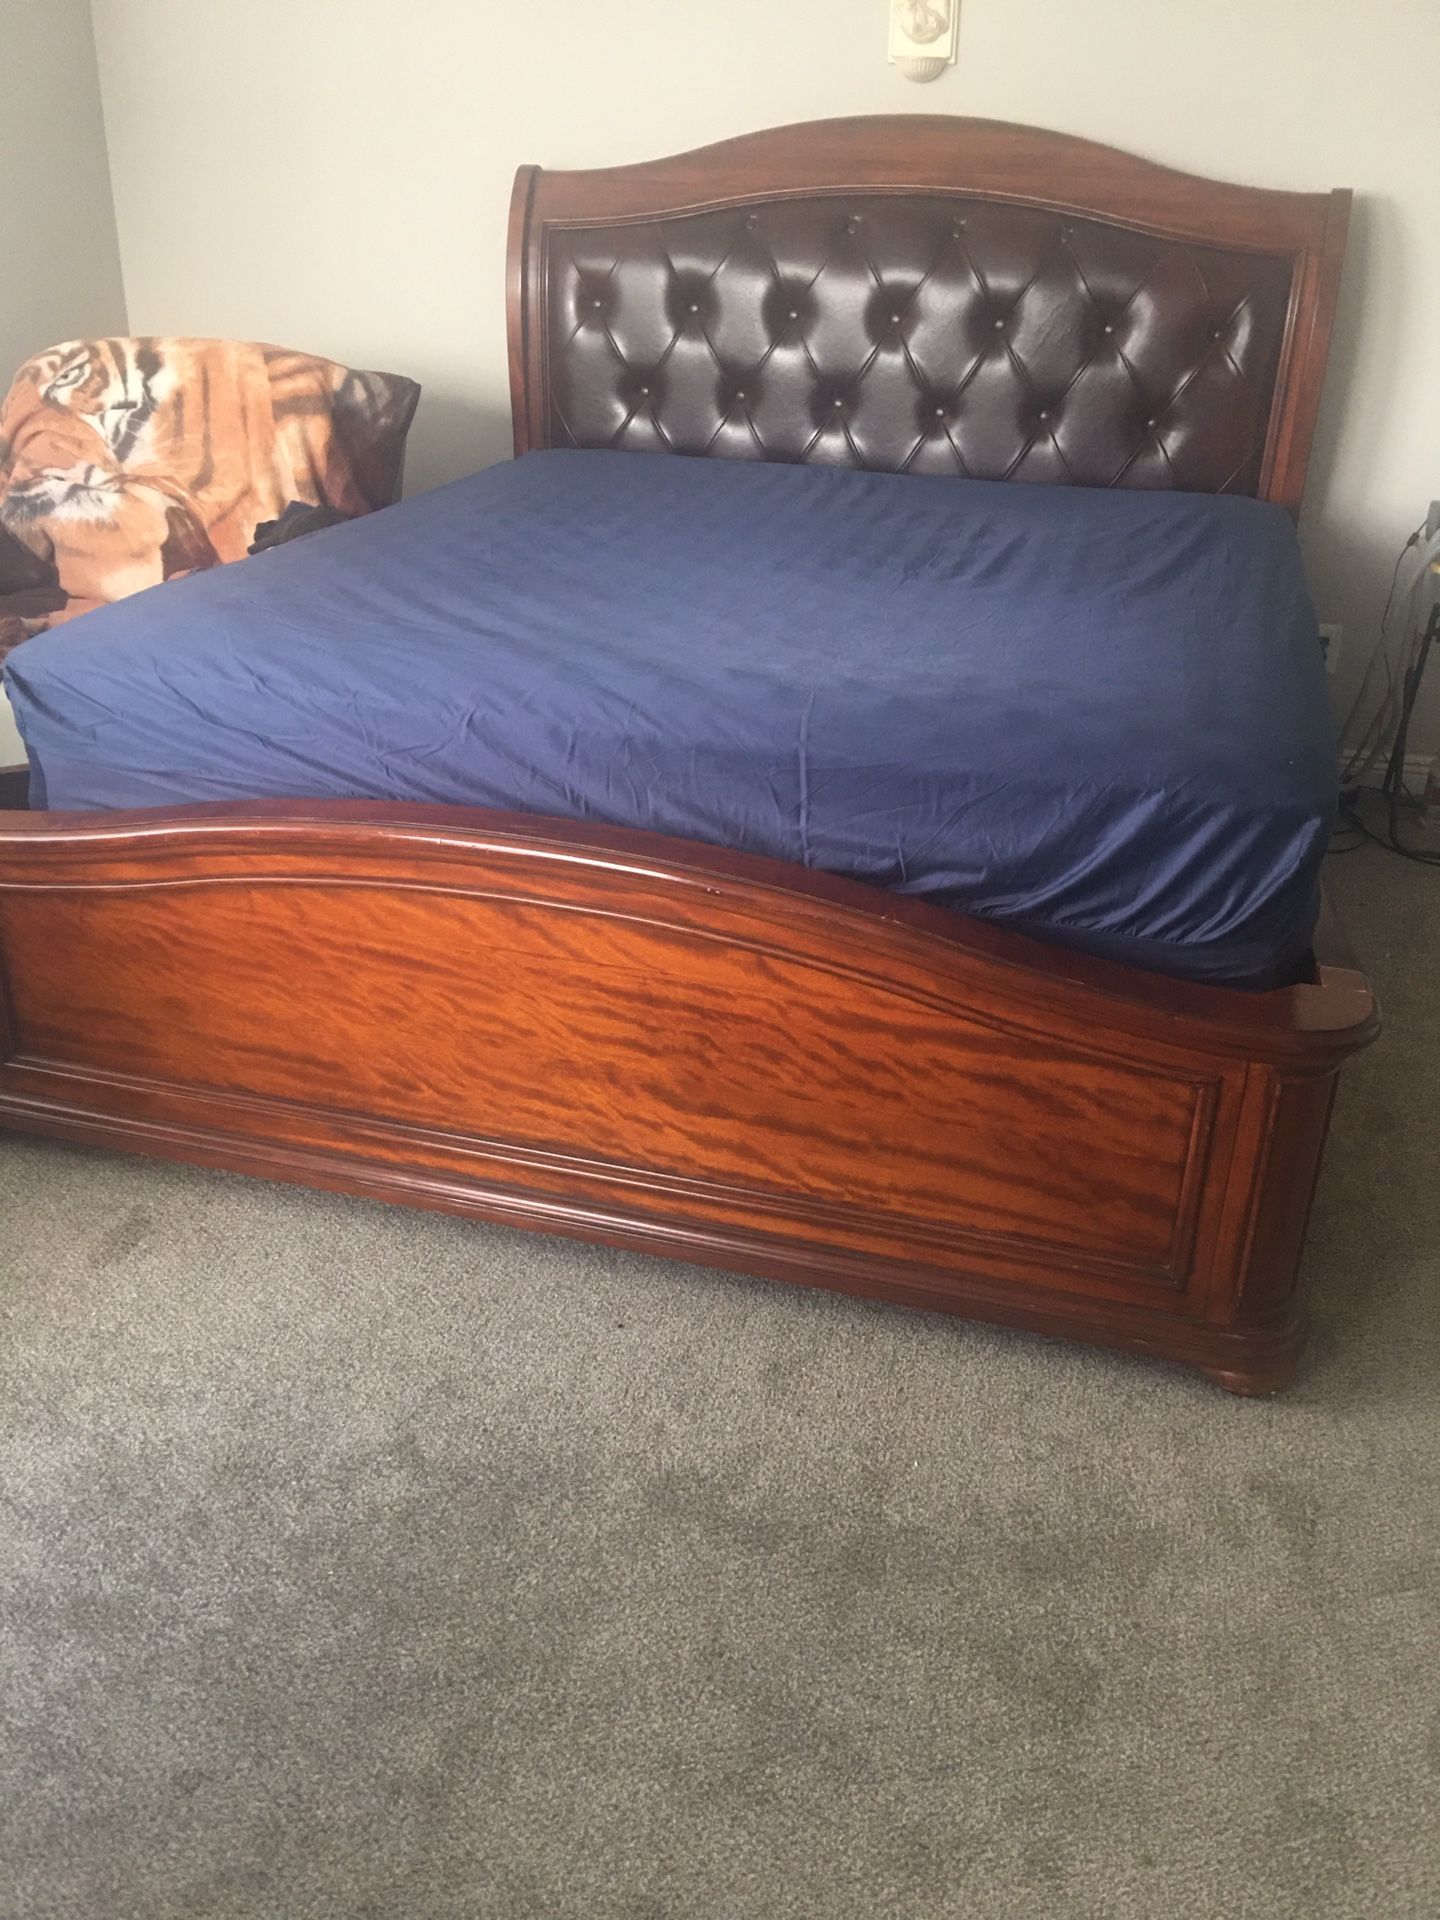 Mattress cal king. And wood frame. Solid